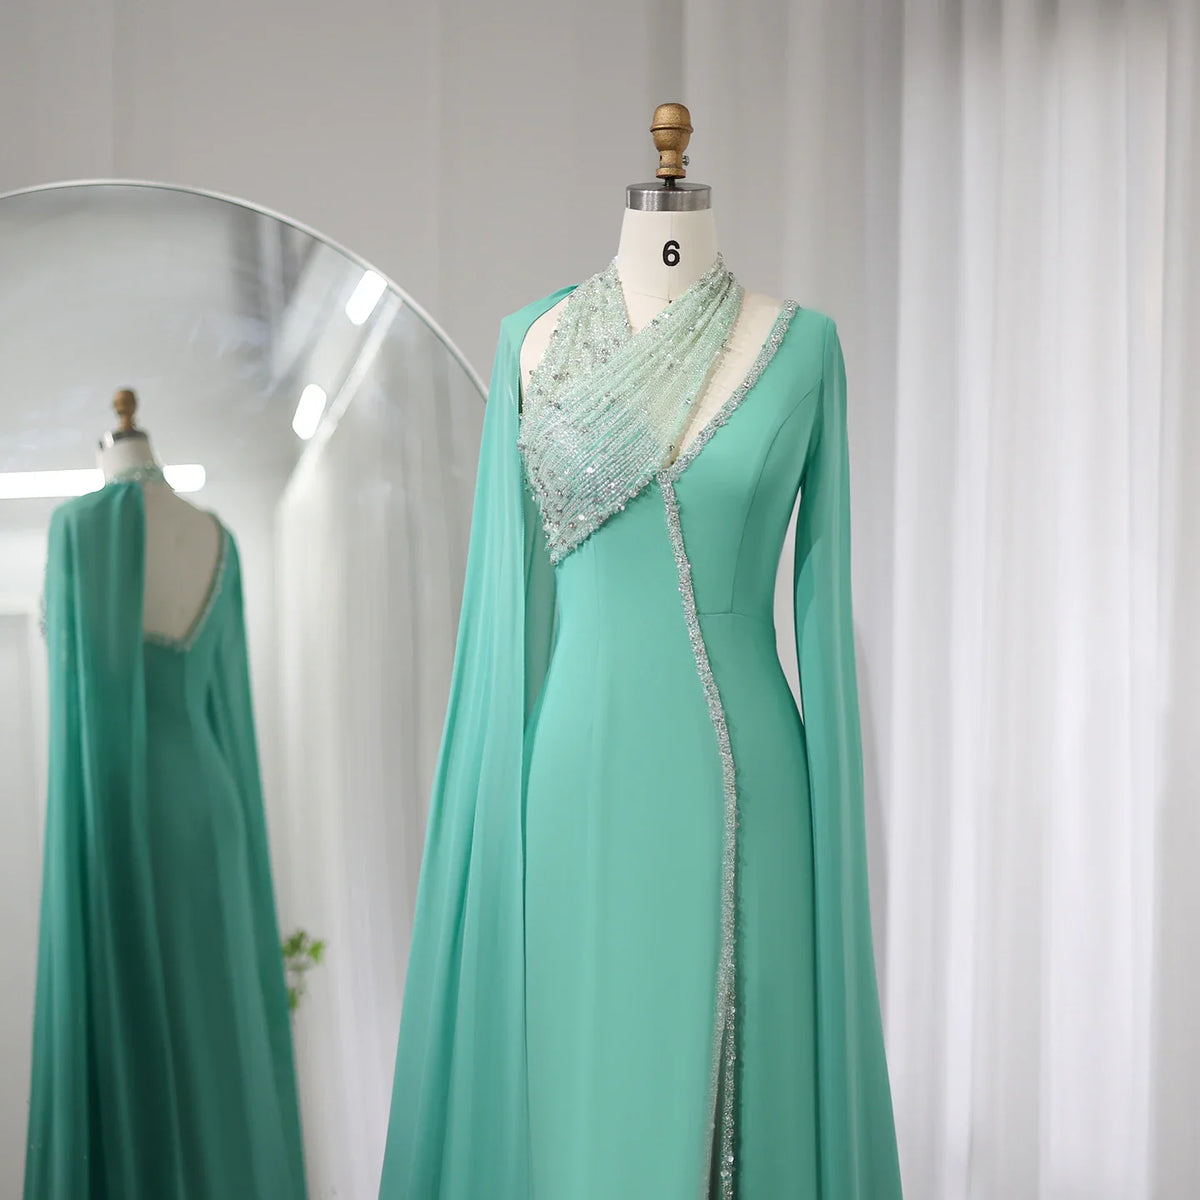 Dreamy Vow Turquoise Green Chiffon Dubai Evening Dress with Cape Sleeves Luxury Beaded Arabic Women Wedding Party Gowns 474